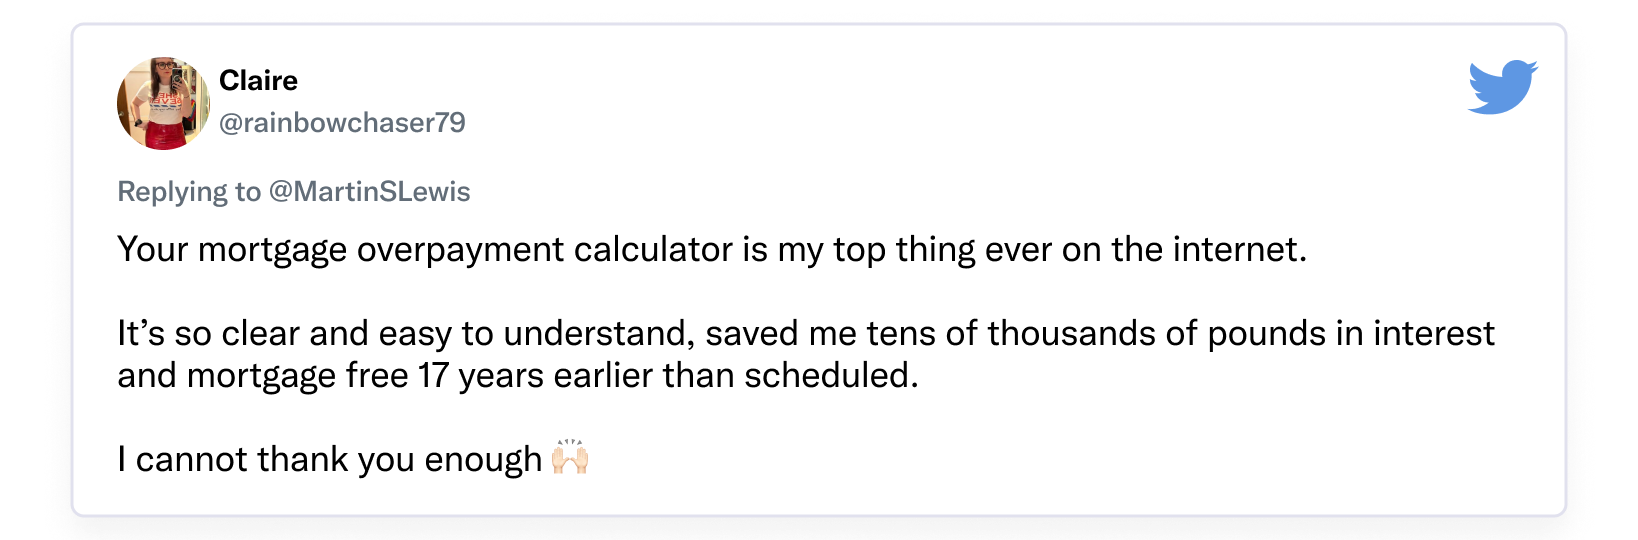 An image of a tweet from Claire, who writes: "Your mortgage overpayment calculator is my top thing ever on the internet. It's so clear and easy to understand, saved me tens of thousands of pounds in interest and [helped me become] mortgage-free 17 years earlier than scheduled. I cannot thank you enough". This links off to MSE's mortgage overpayment calculator.